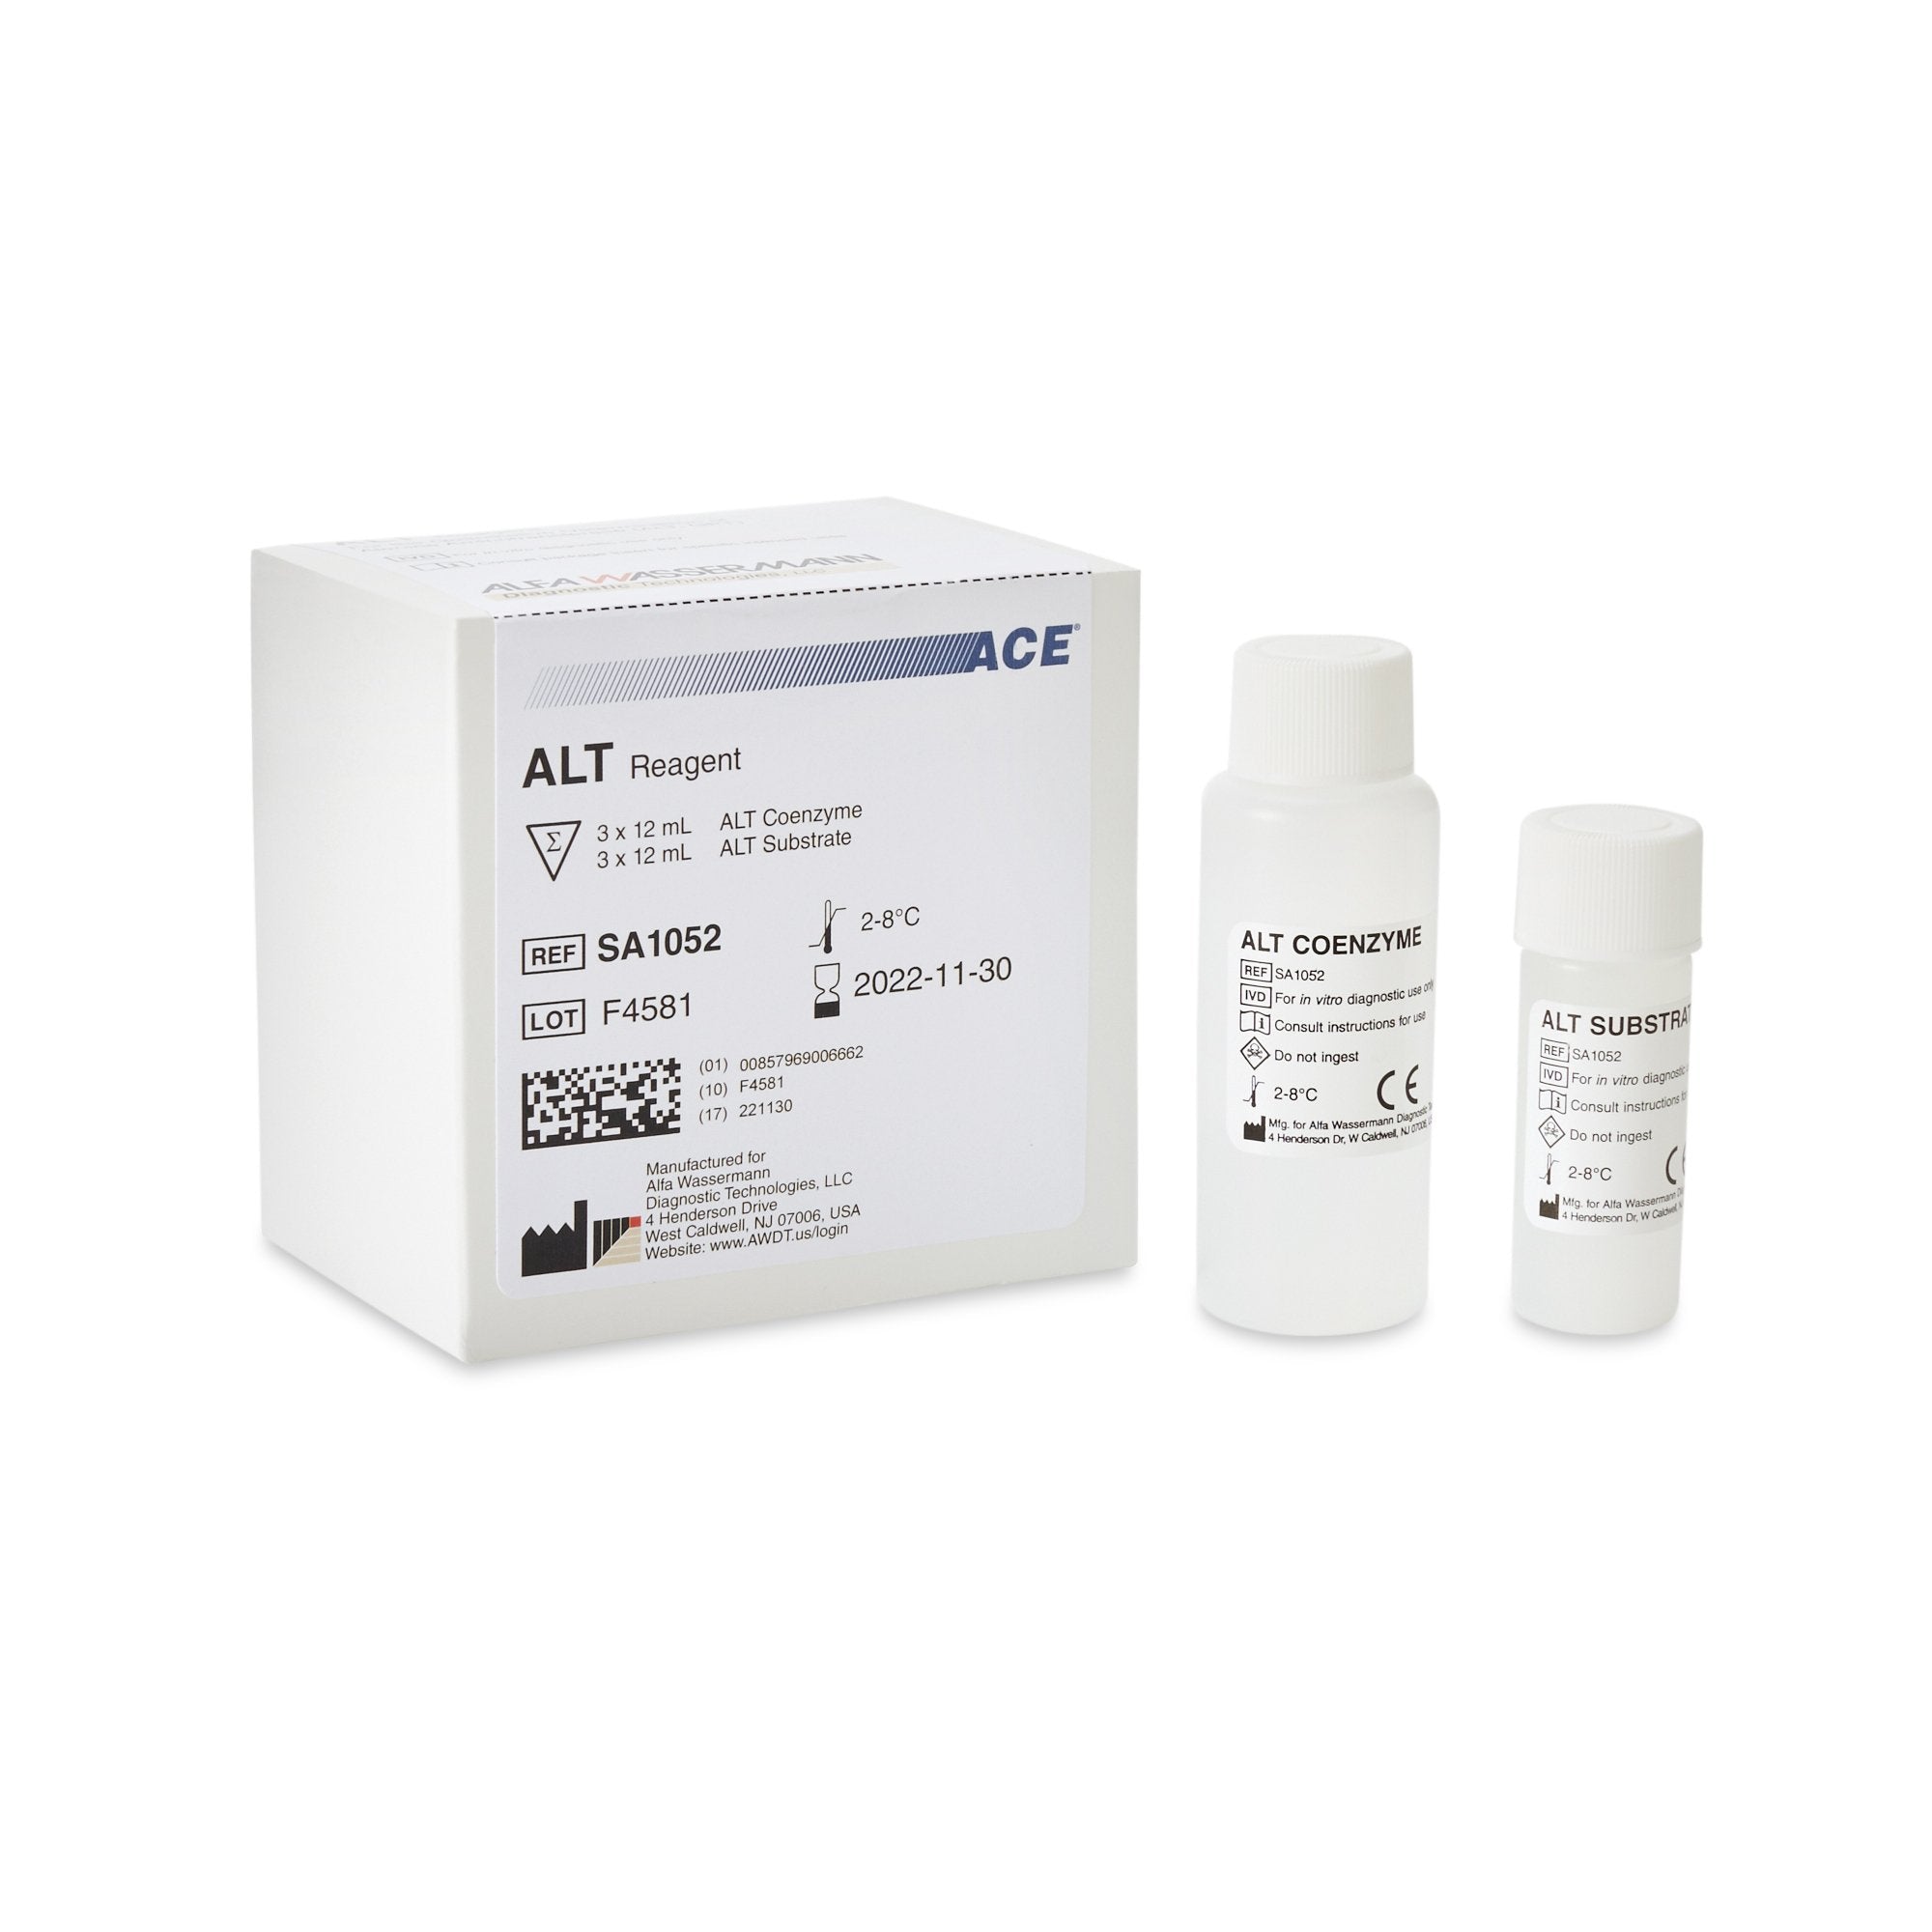 General Chemistry Reagent Alanine Aminotransferase (ALT) For ACE Axcel / ACE Alera Clinical Chemistry Systems 450 Tests